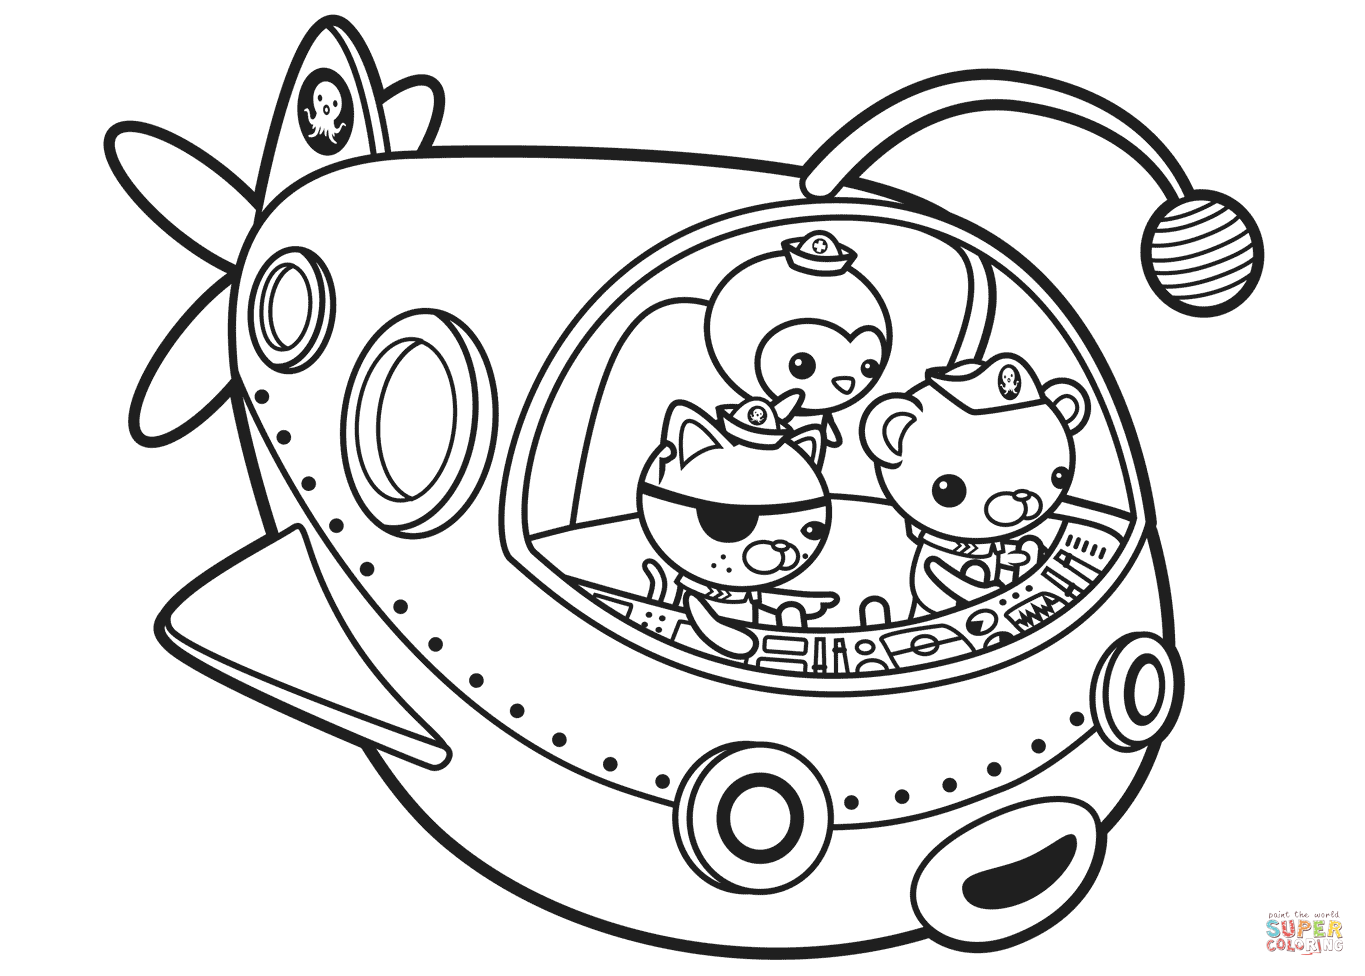 octonauts-peso-coloring-pages-at-getcolorings-free-printable